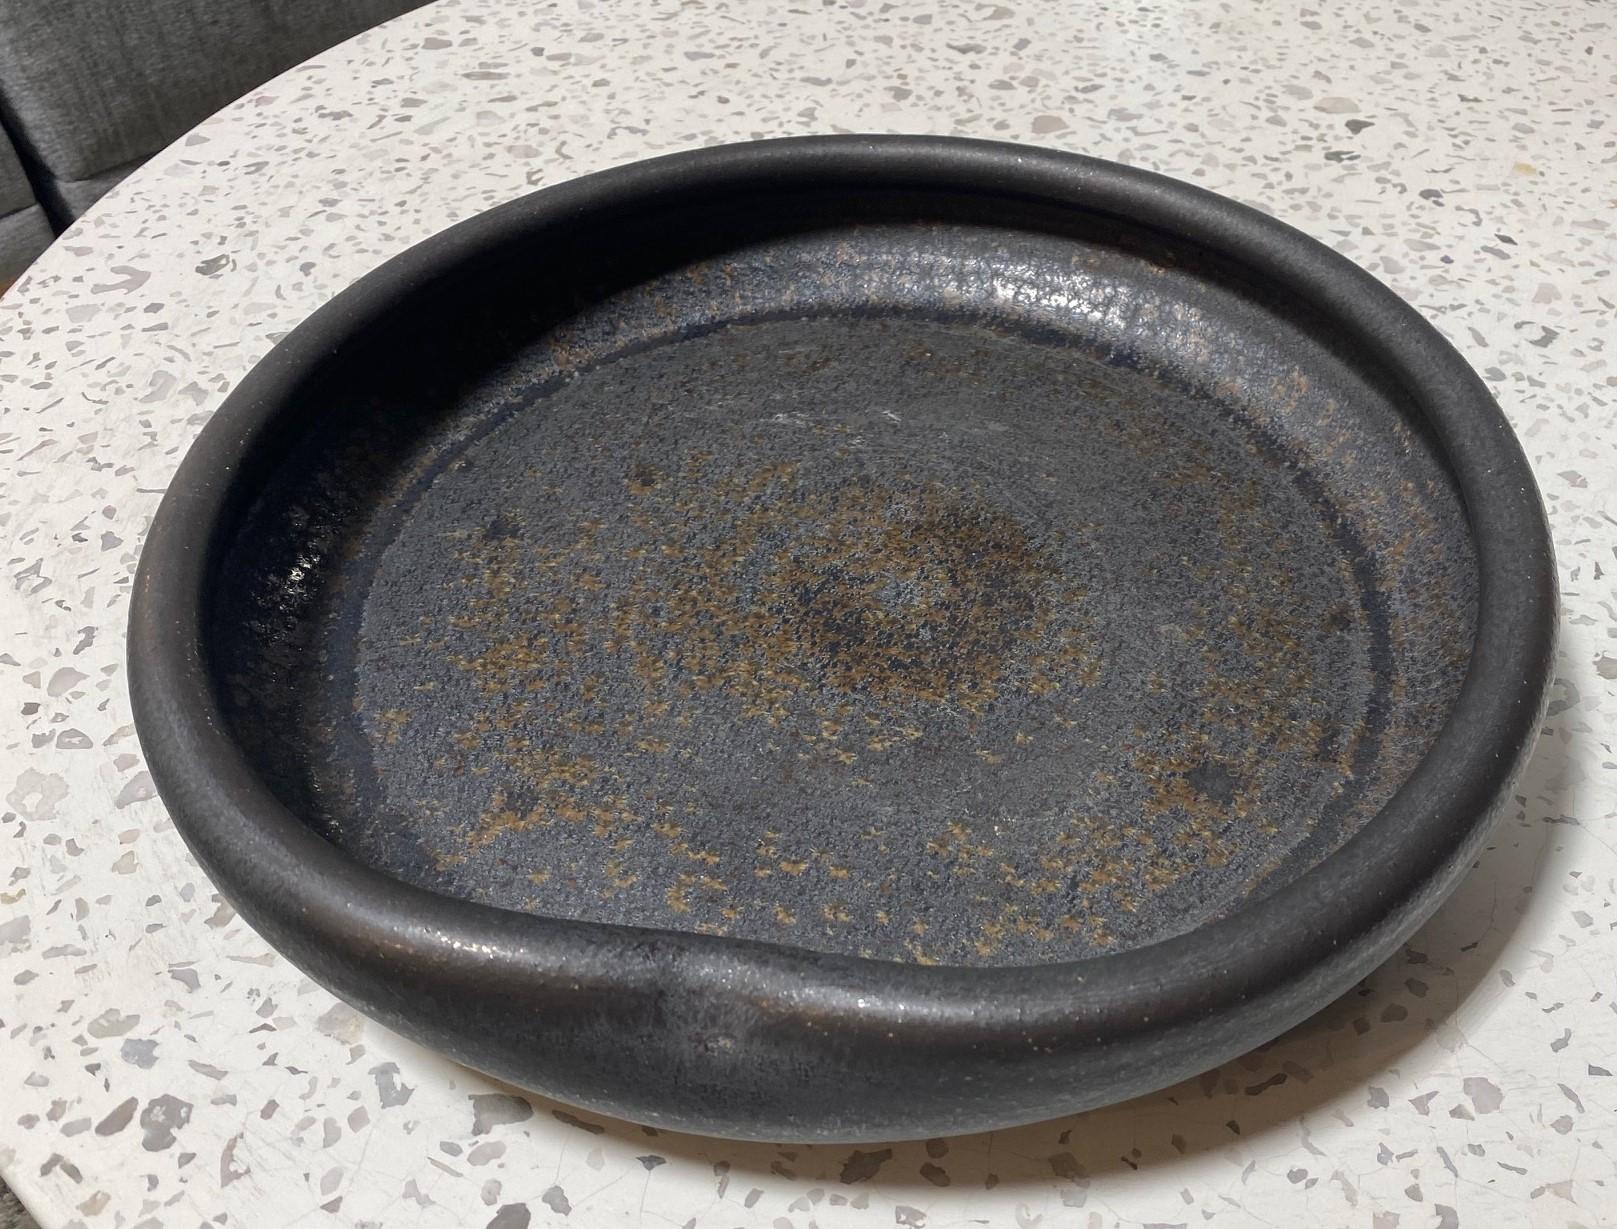 A truly fabulous, large, heavy, wonderfully crafted, and uniquely designed centerpiece Studio Pottery bowl. The work features a fantastic black metallic glaze similar to works by Otto and Gertrude Natzler. Quite spectacular. 

Signed by the